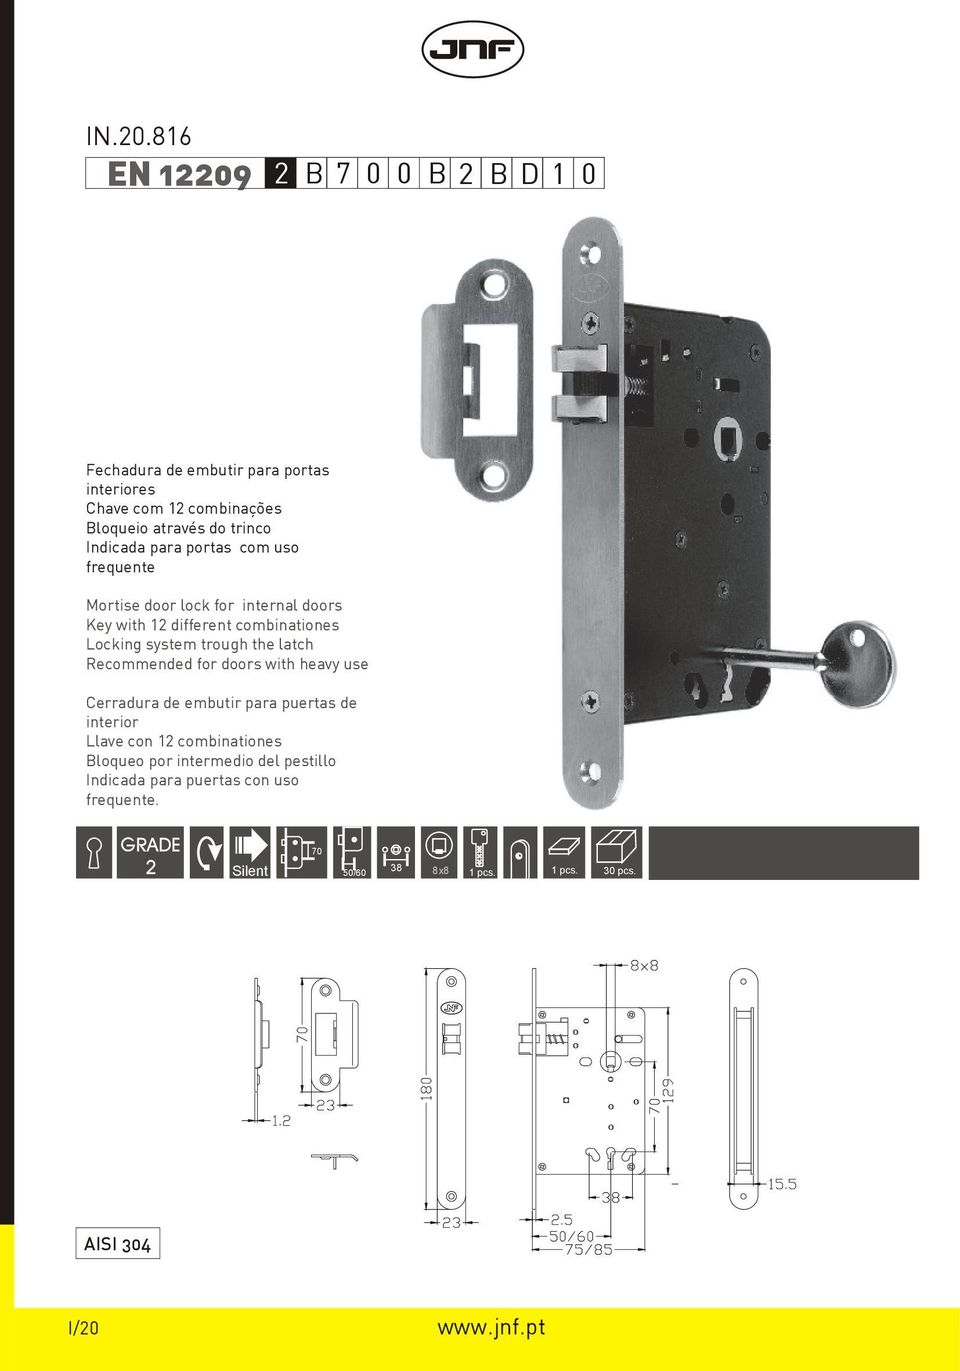 Indicada para portas com uso frequente Mortise door lock for internal doors Key with 12 different combinationes Locking system trough